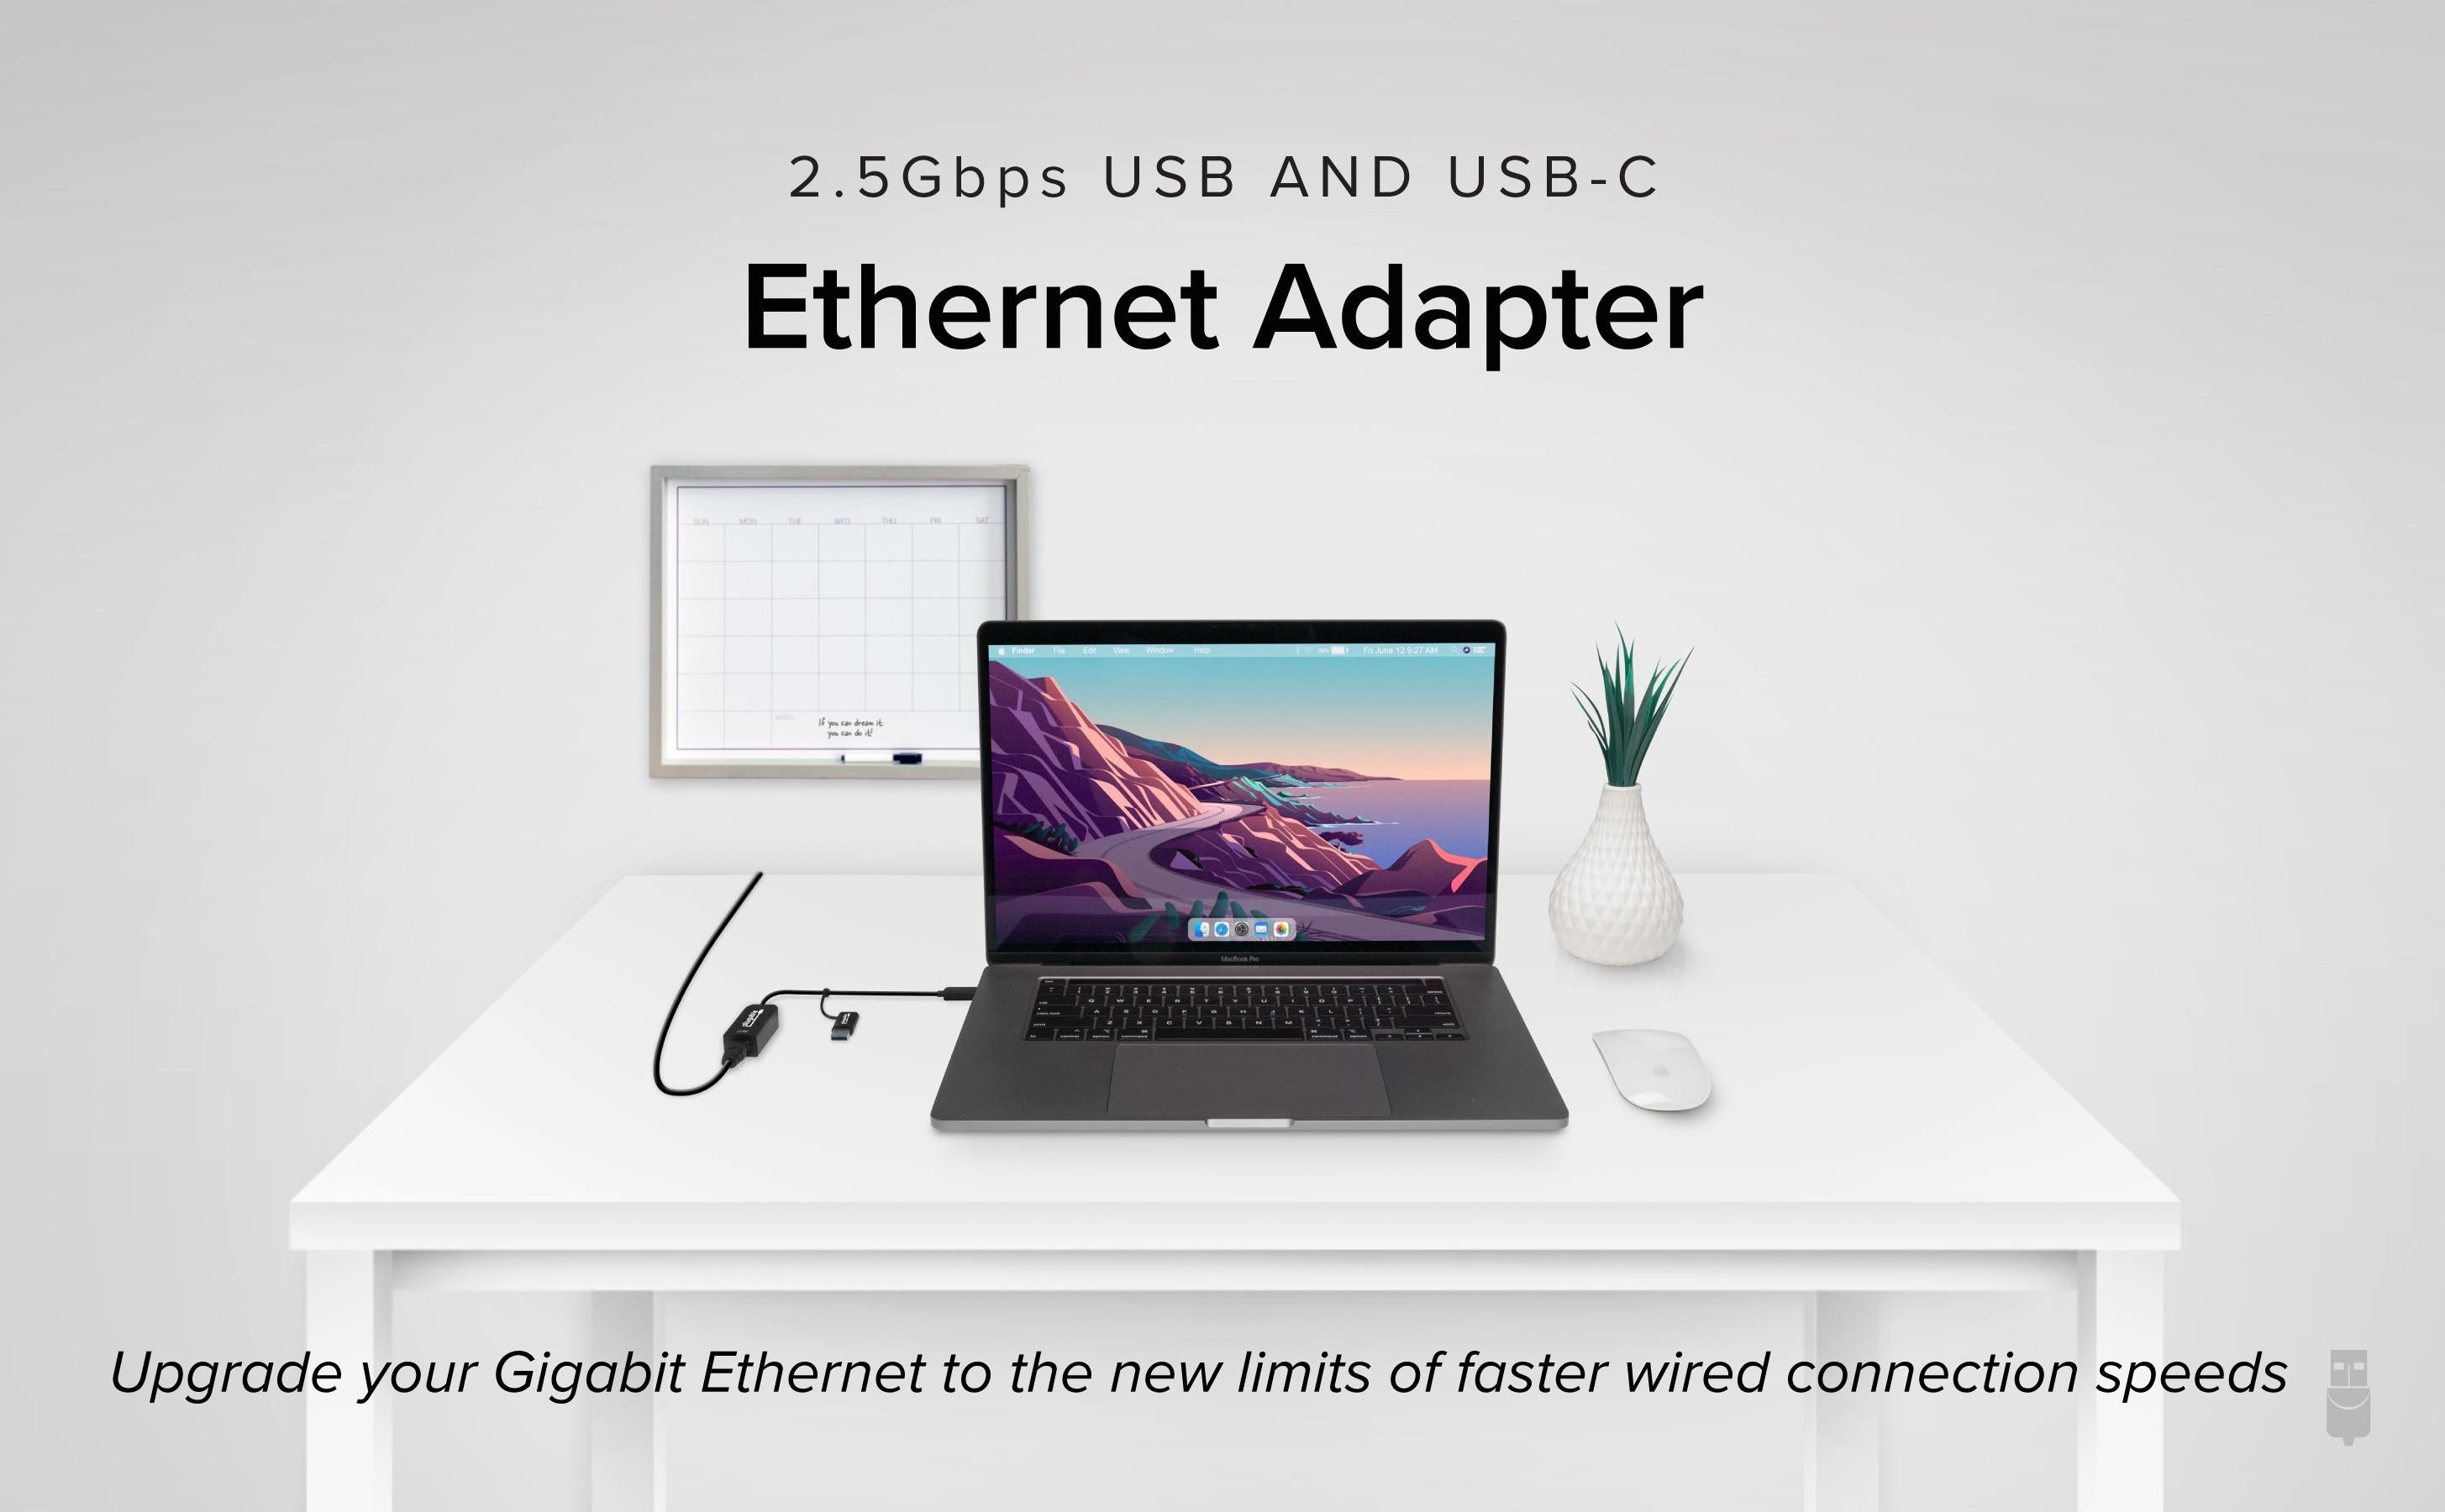 Banner image stating upgrade your Gigabit Ethernet to the new limits of faster wired connection speeds